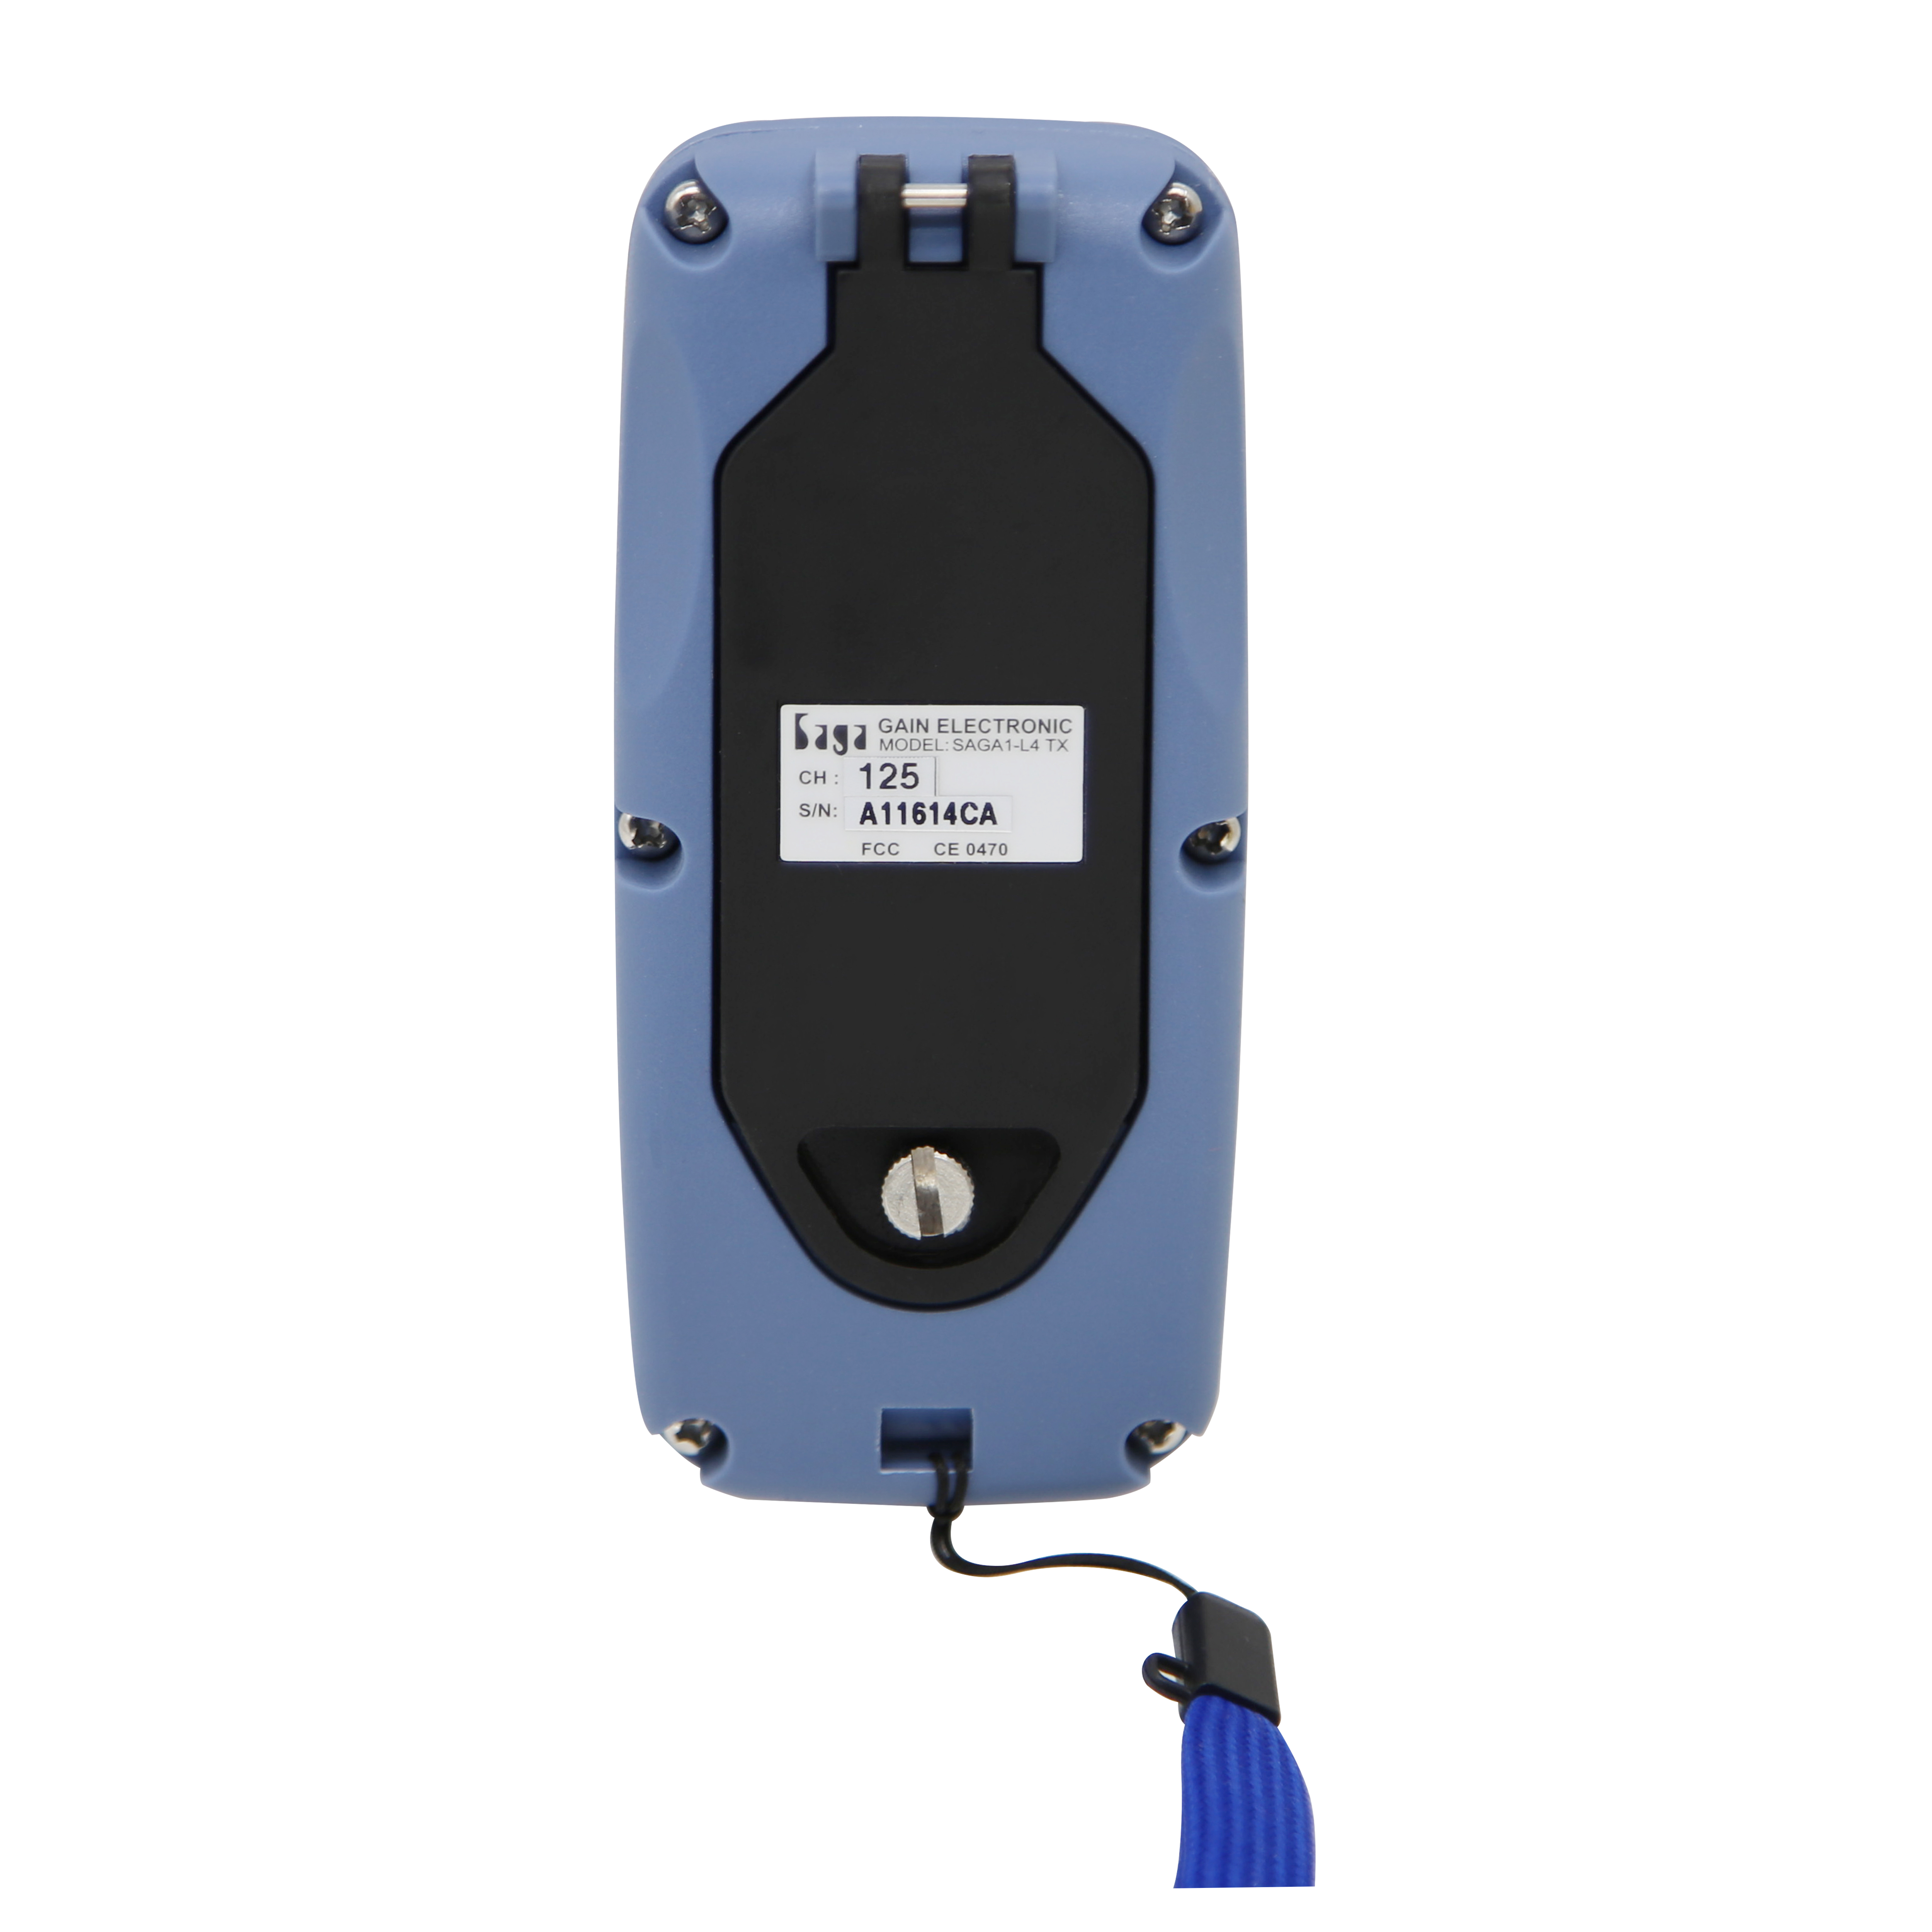 What is a wireless remote control for electric hoist?